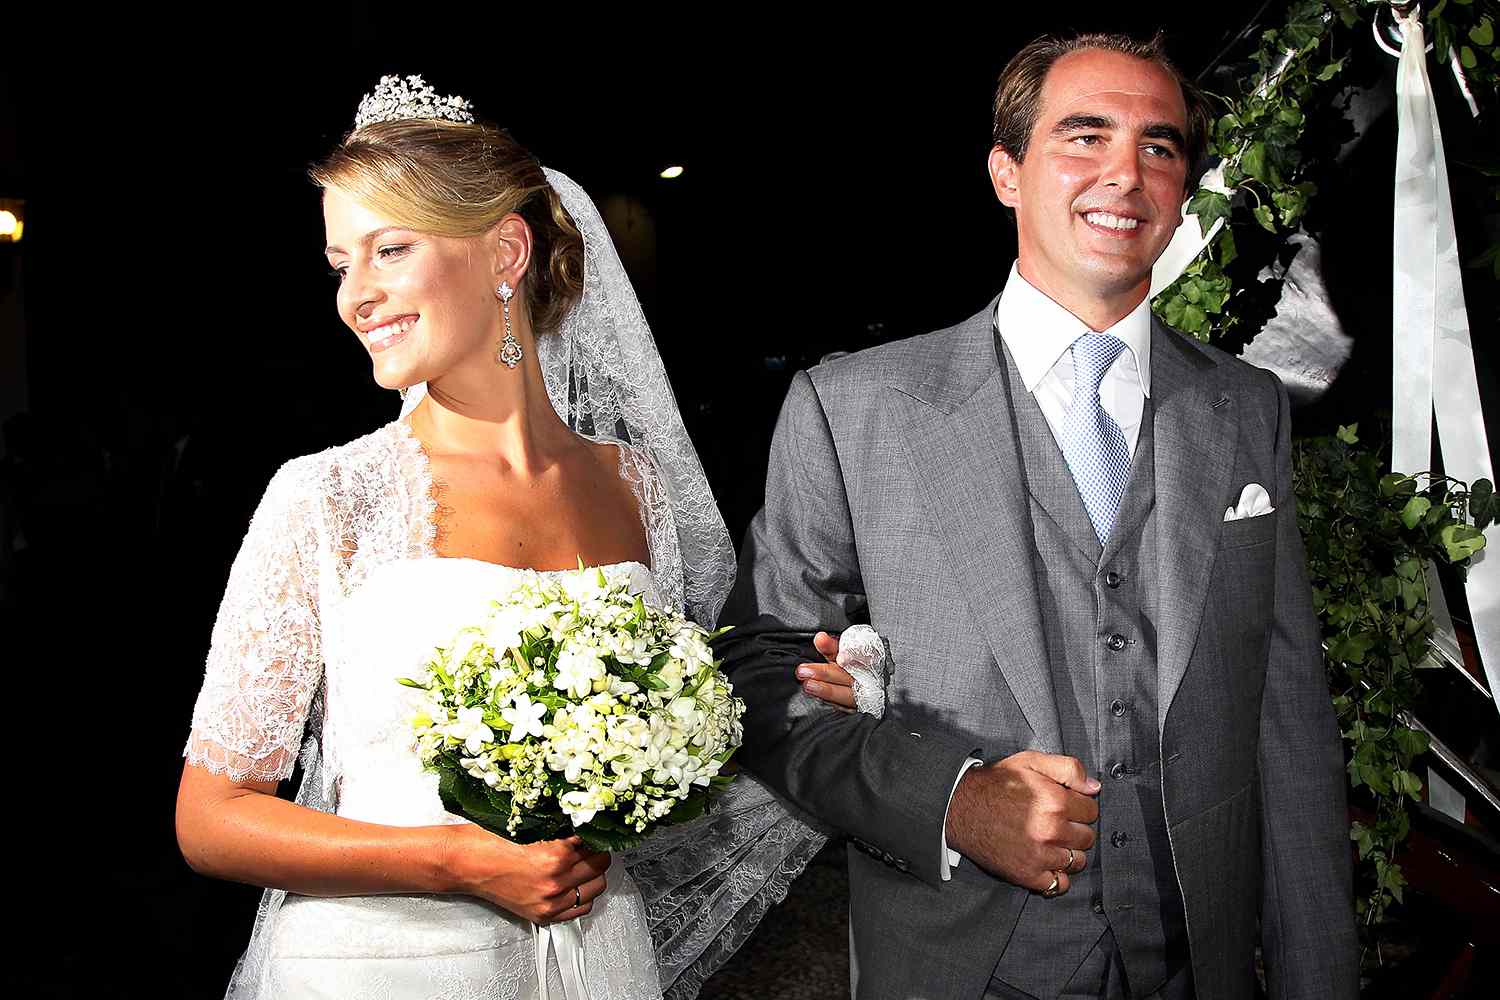 Princess Nikolaos of Greece and Denmark (Tatiana Blatnik) leave in a horse drawn carriage after getting married at the Cathedral of Ayios Nikolaos (St. Nicholas) on August 25, 2010 in Spetses, Greece.